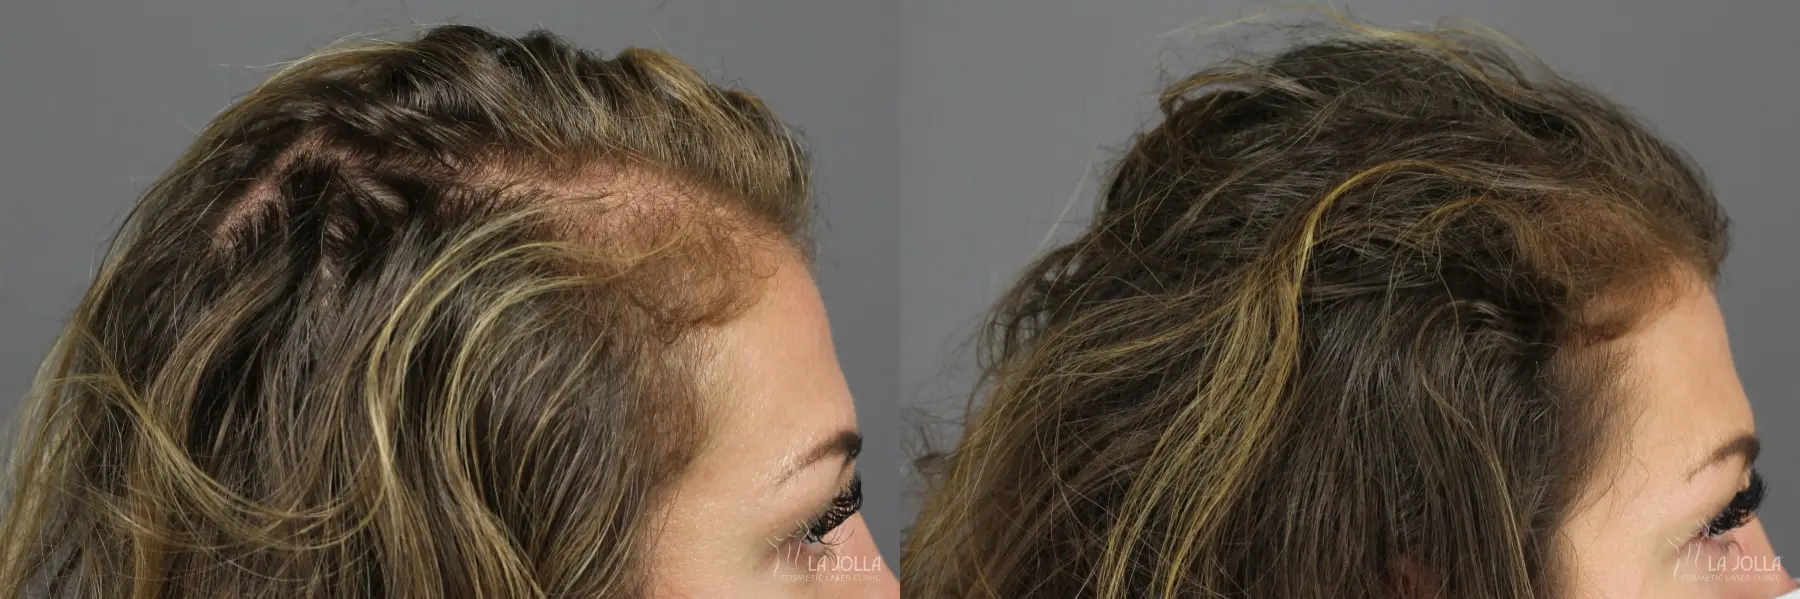 PRP (Platelet-Rich Plasma): Patient 3 - Before and After 3